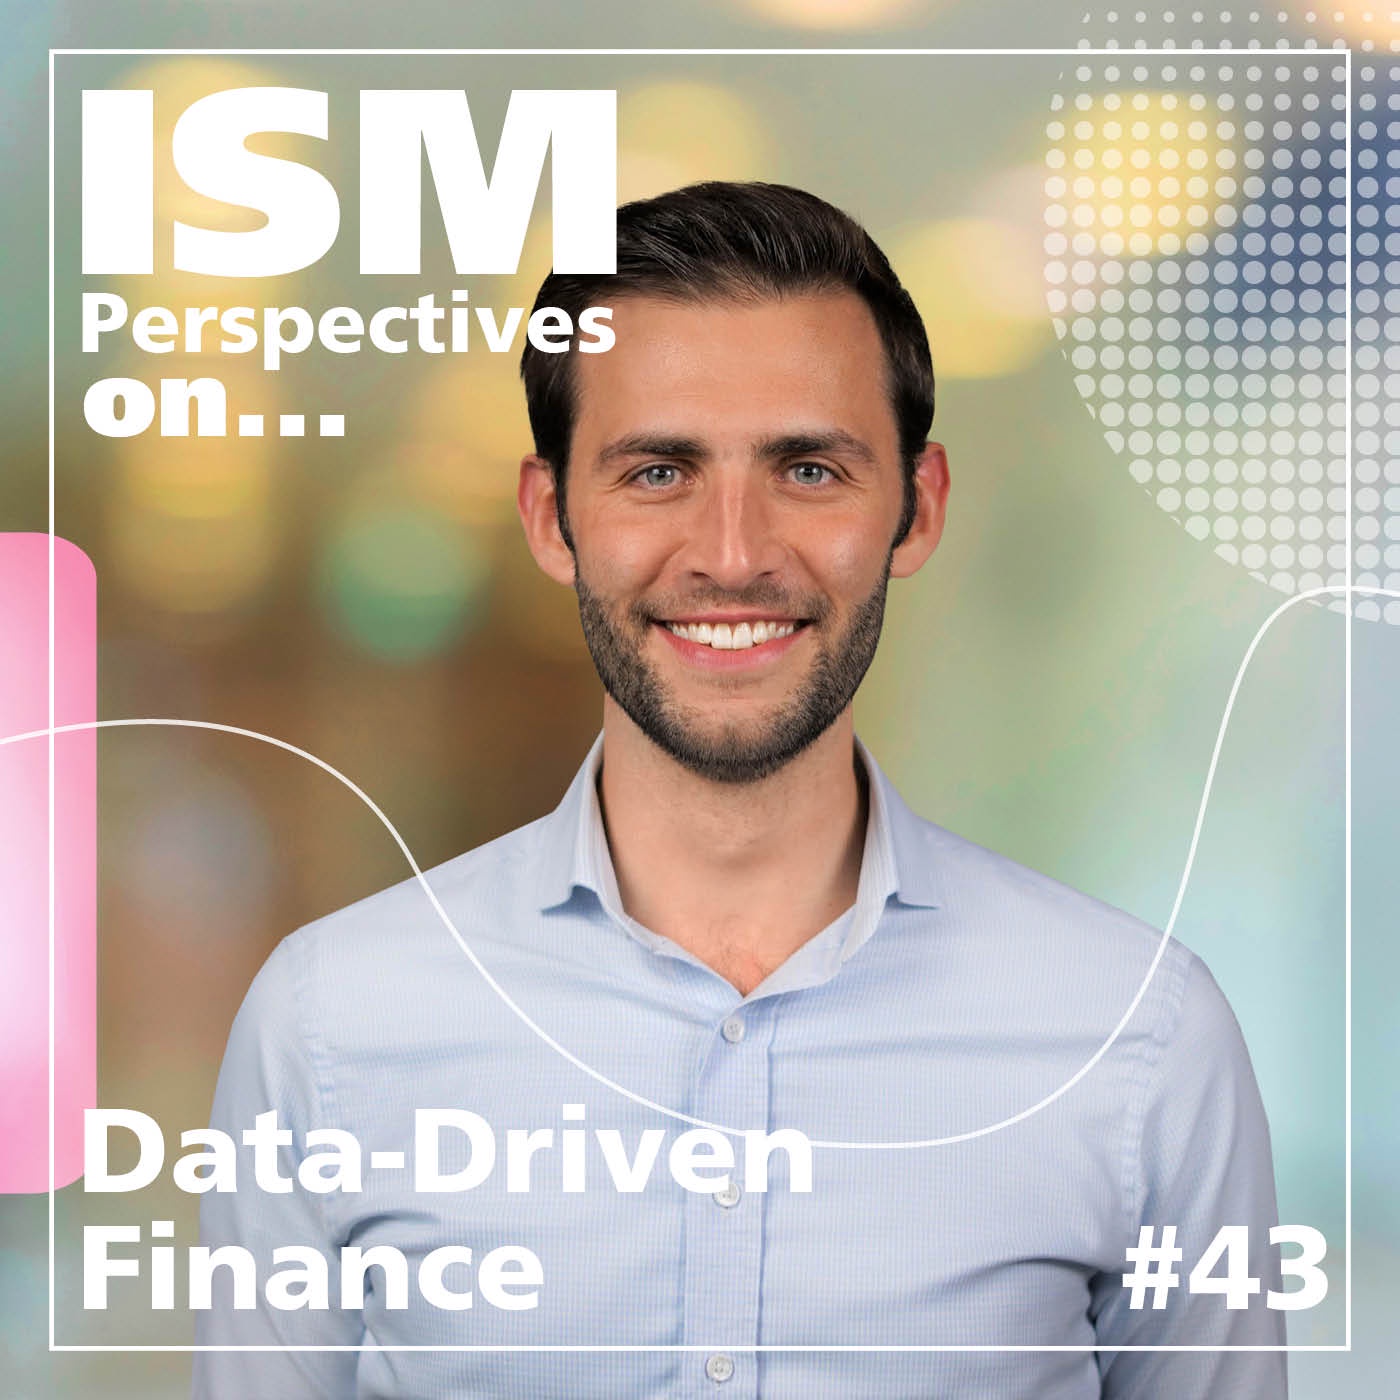 Perspectives on: Data-Driven Finance